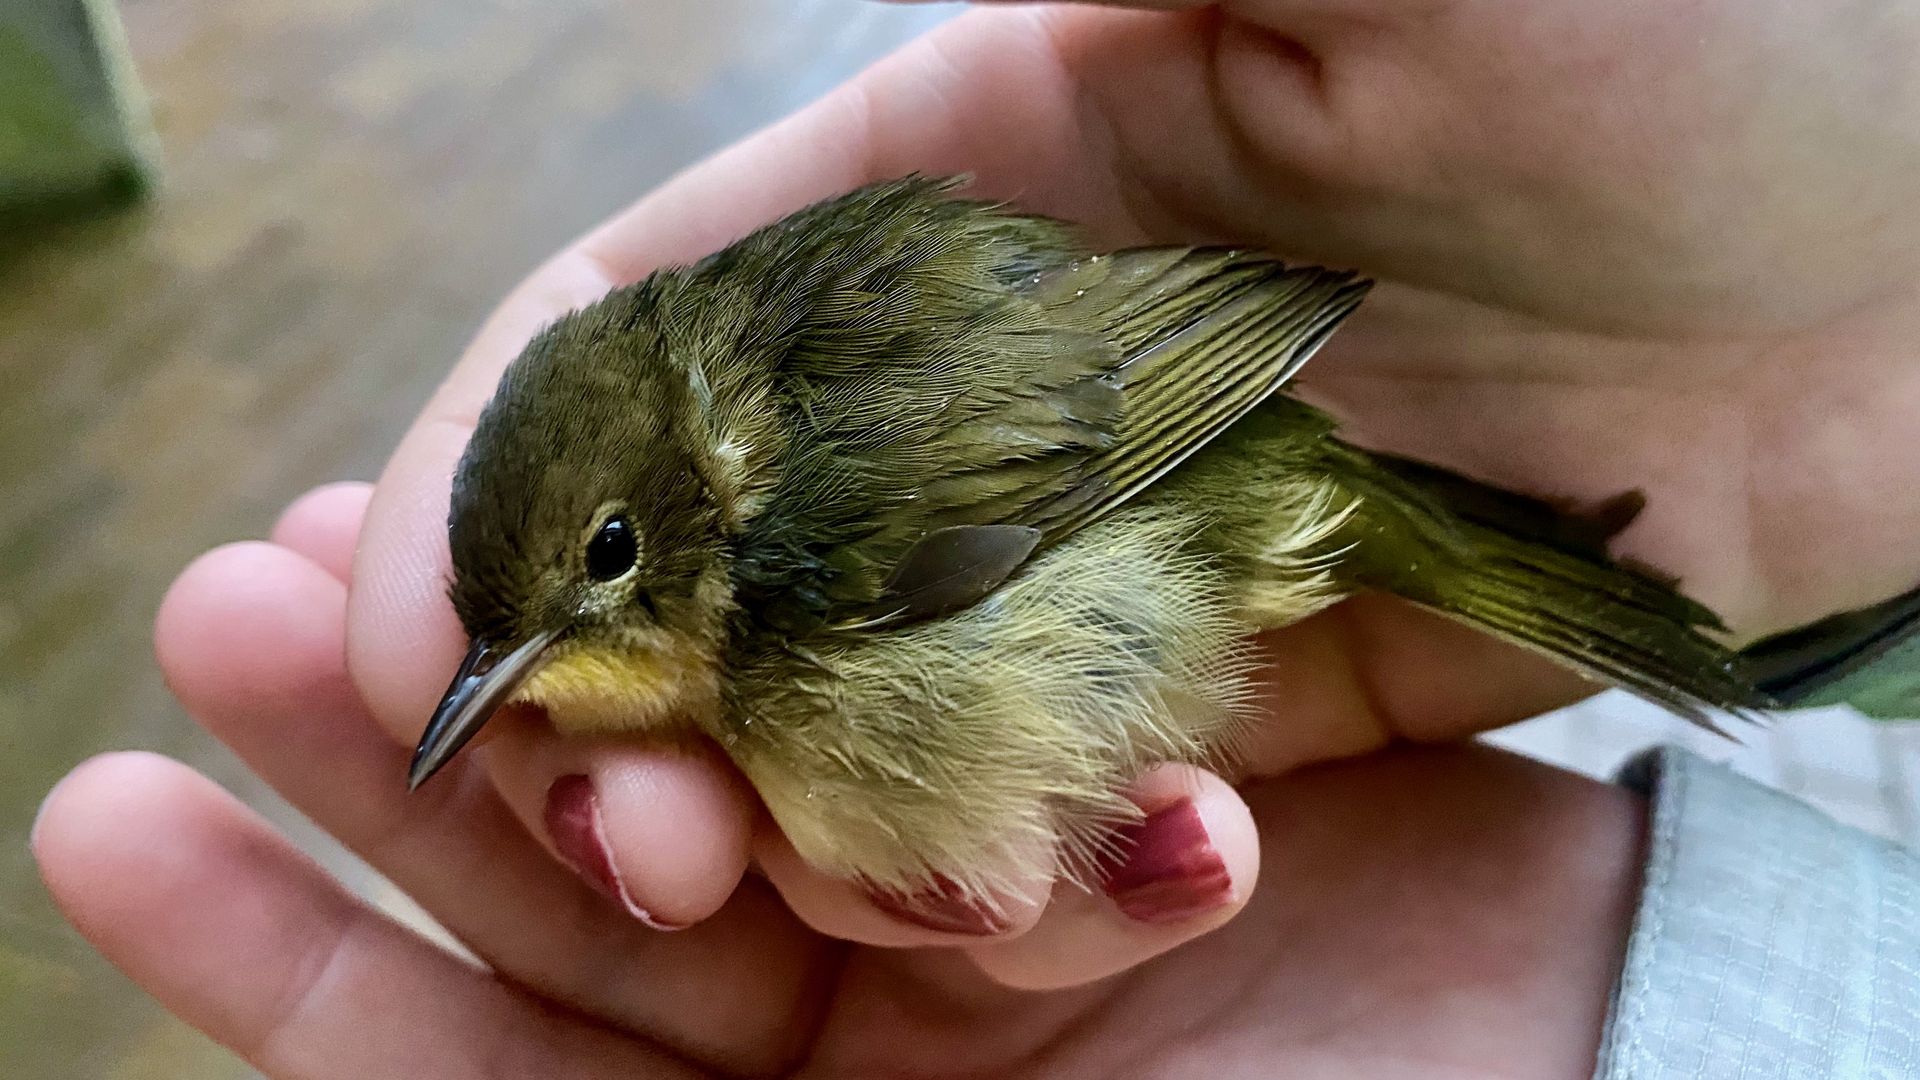 A common yellowthroat warbler warbler held in a woman's hands